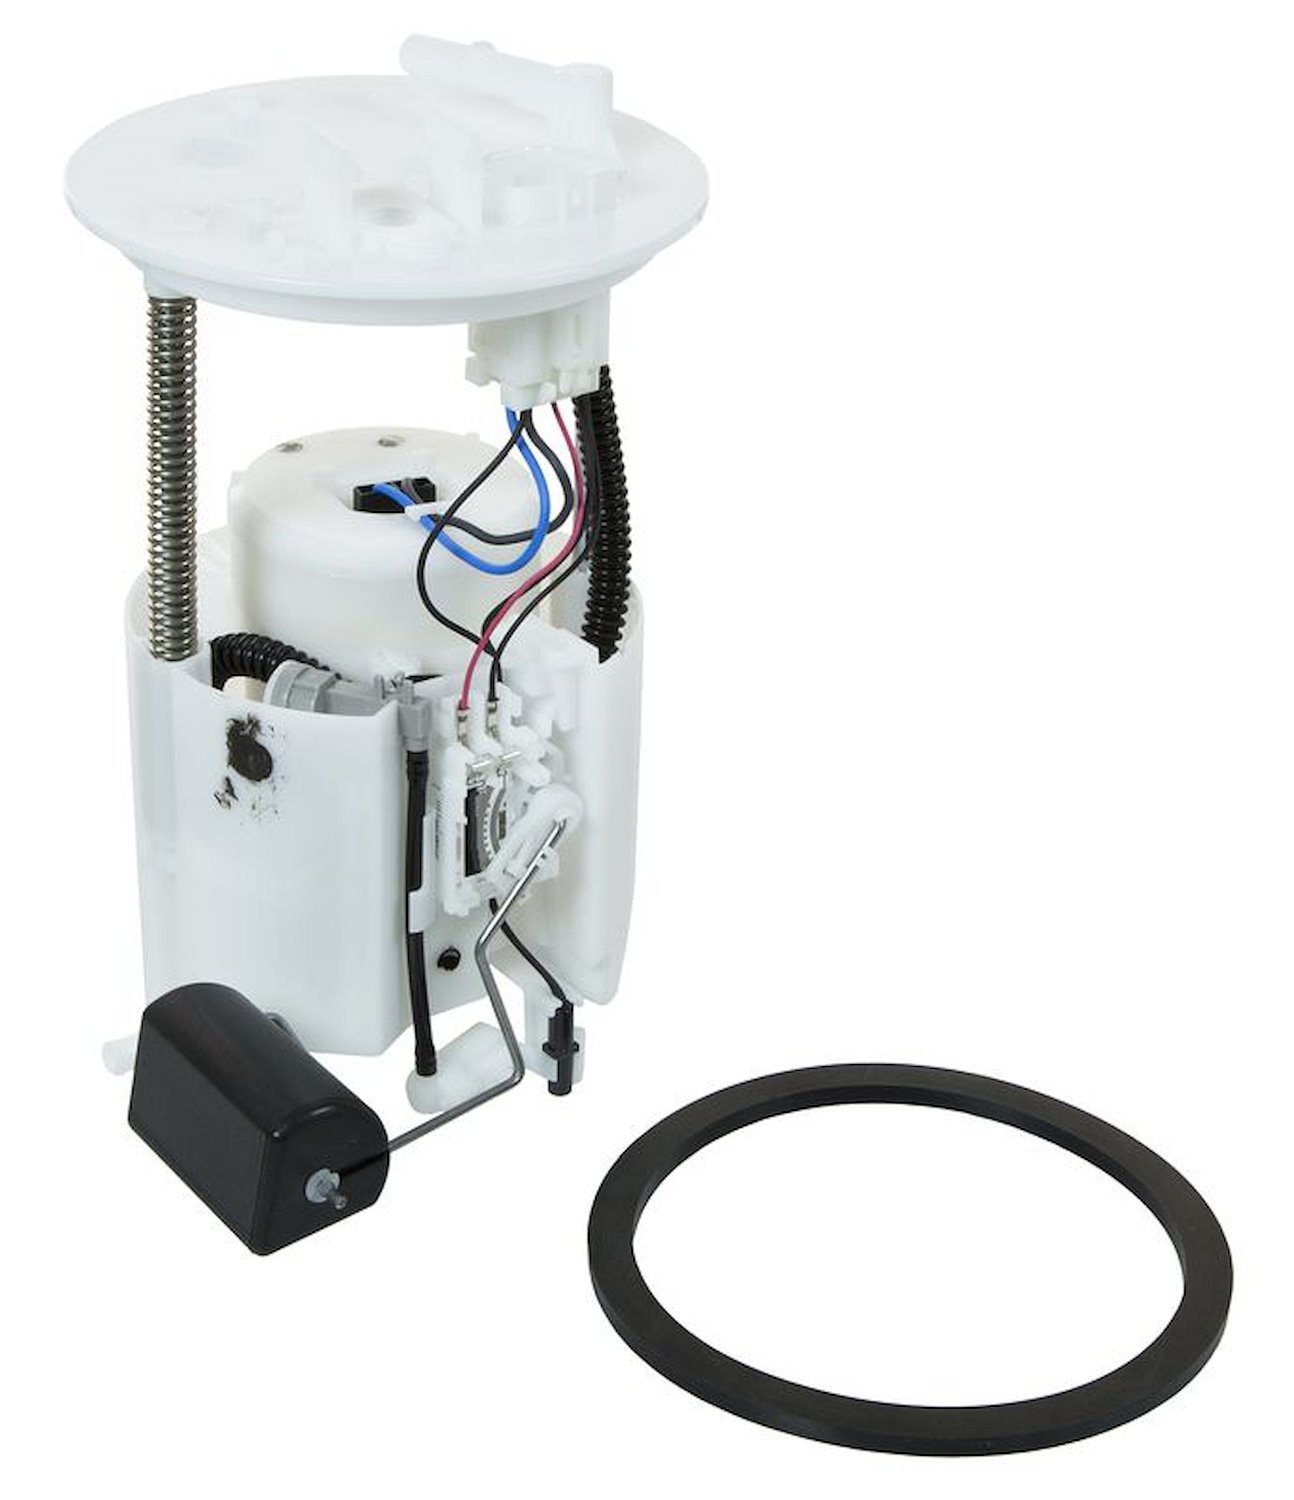 OE Replacement Fuel Pump Module Assembly for 2007-2009 Mitsubishi Galant/2006-2012 Mitsubishi Eclipse